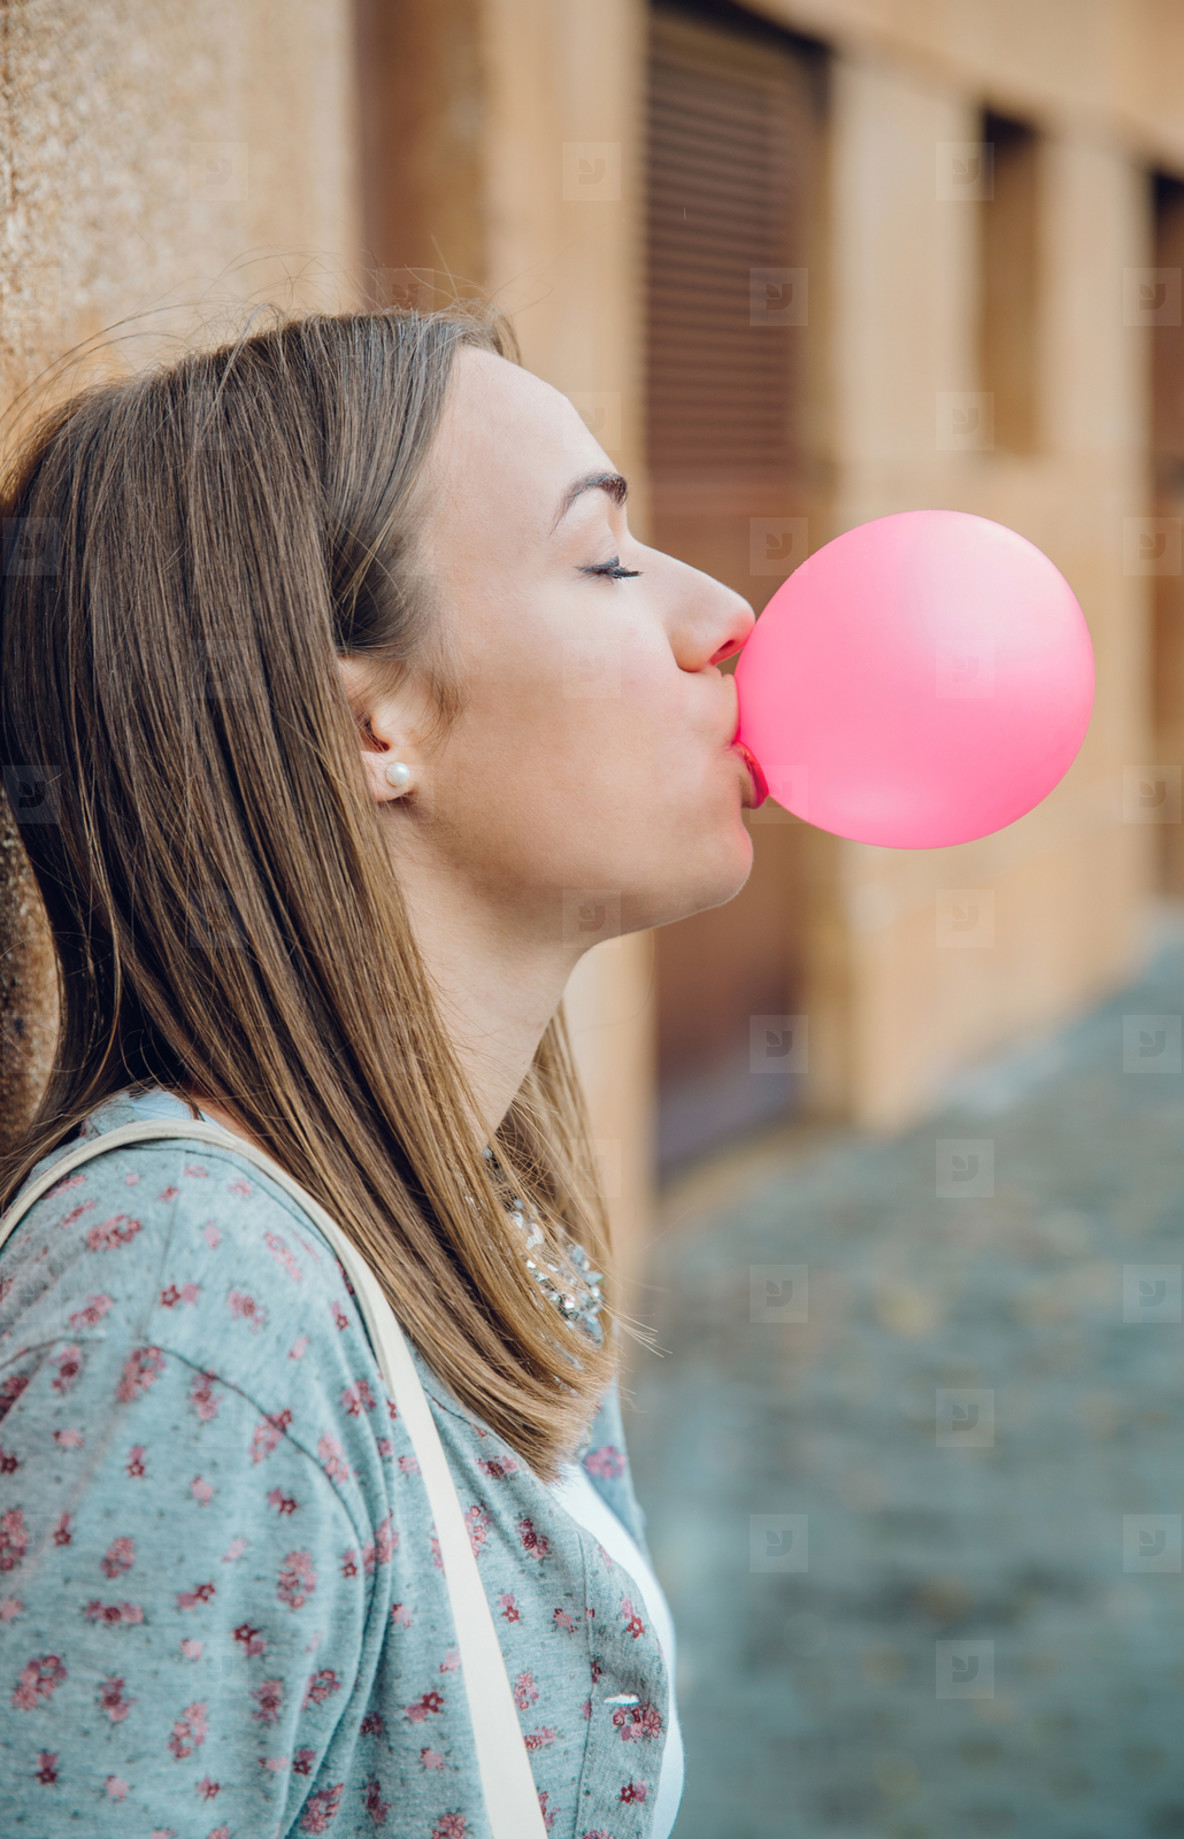 anil kuttappan recommends woman blowing bubble gum pic